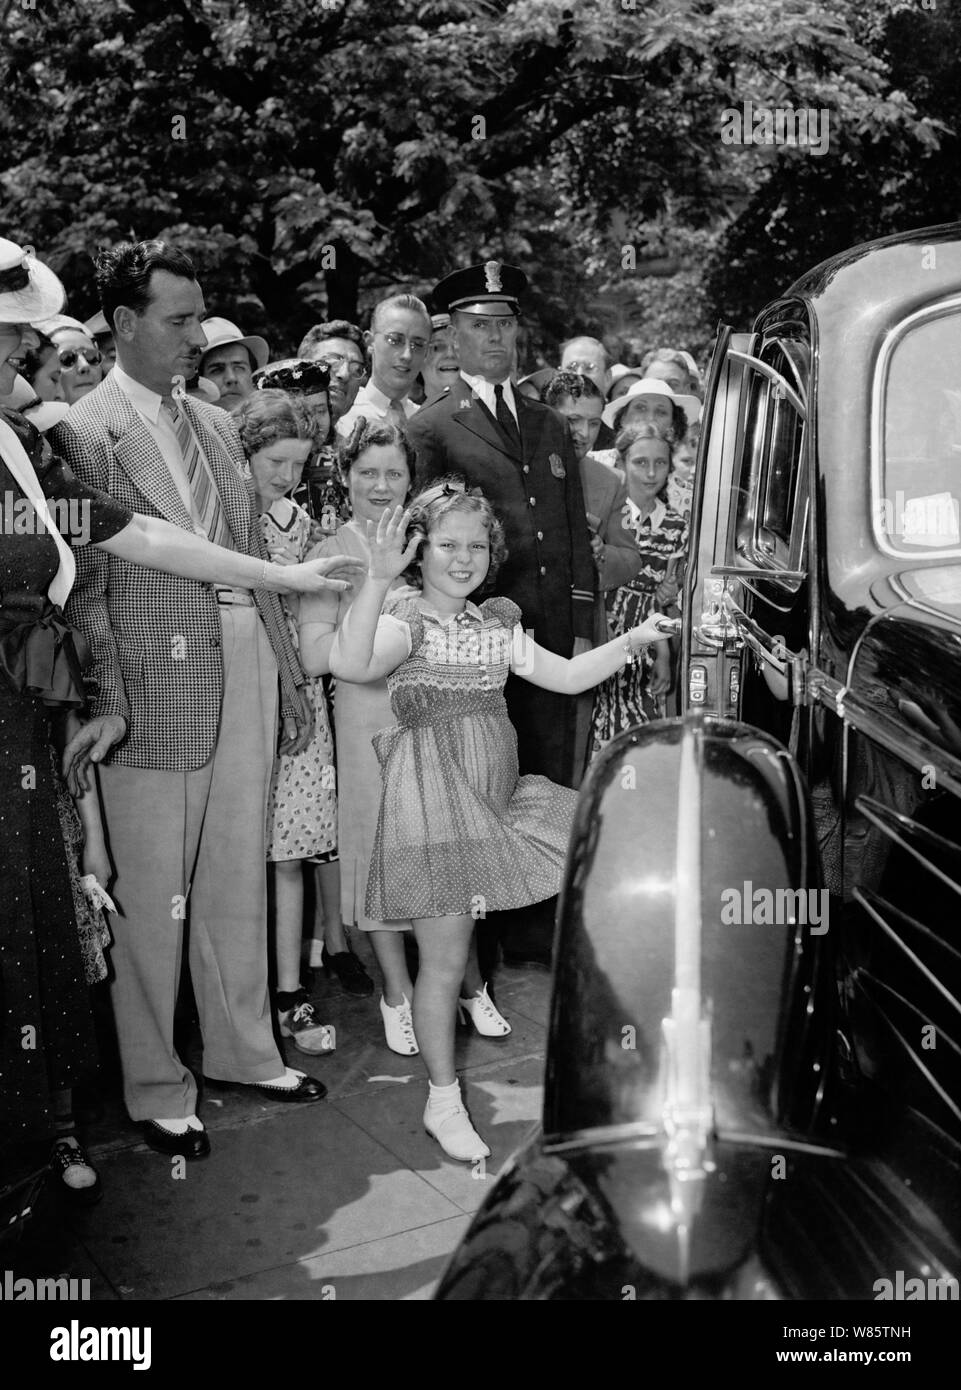 Vintage photo of American child film star Shirley Temple (1928 – 2014). The image was captured on June 24 1938 as the young actress waved to onlookers after she left the White House following a meeting with US President Franklin D Roosevelt. During their conversation she told the President how she had lost a tooth the night before when it fell out as she ate a sandwich. Stock Photo